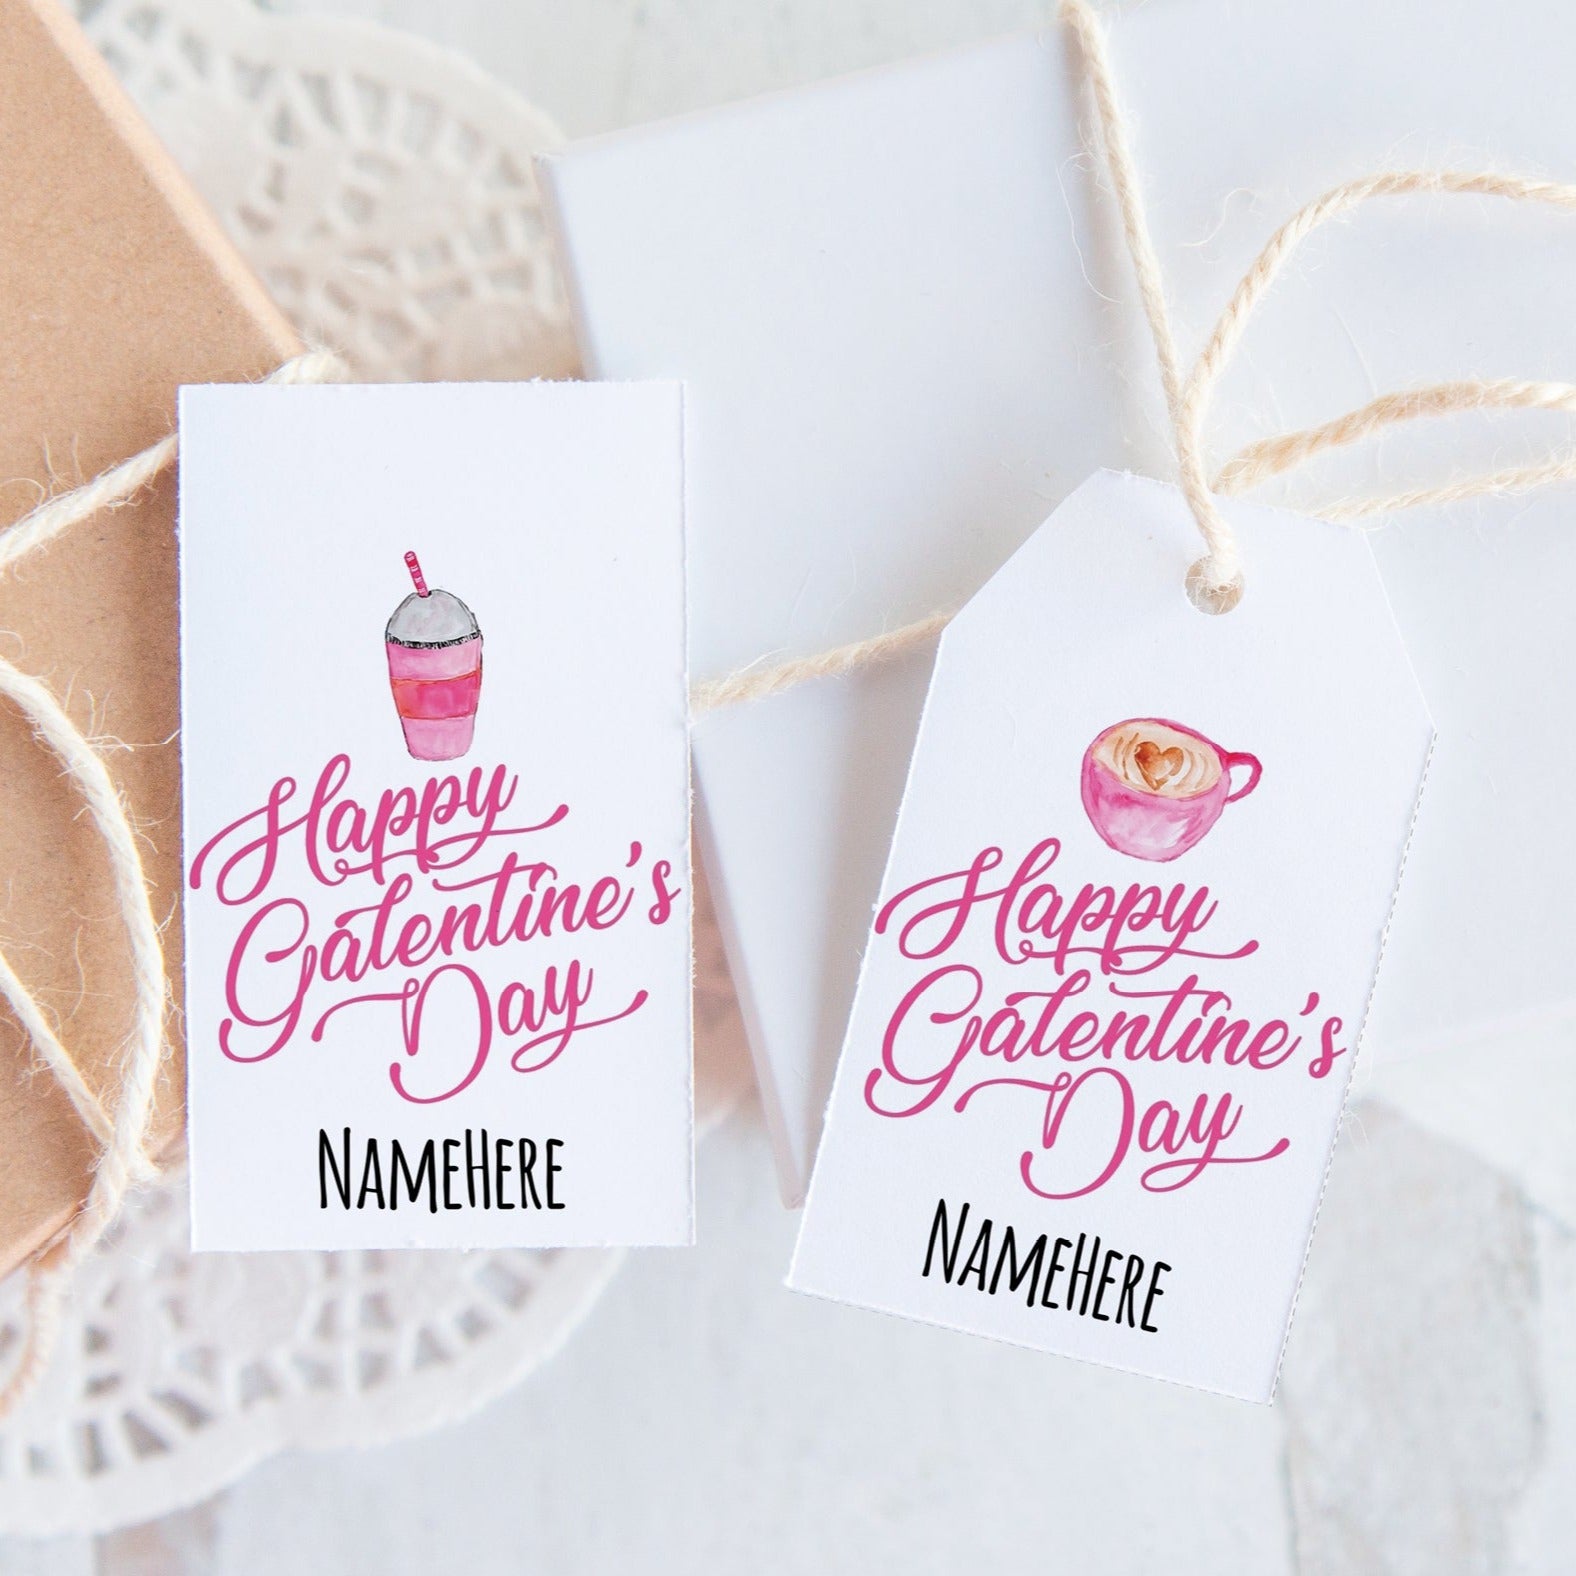 Galentine's Gift Tag Set - Cupcakes and Beverages